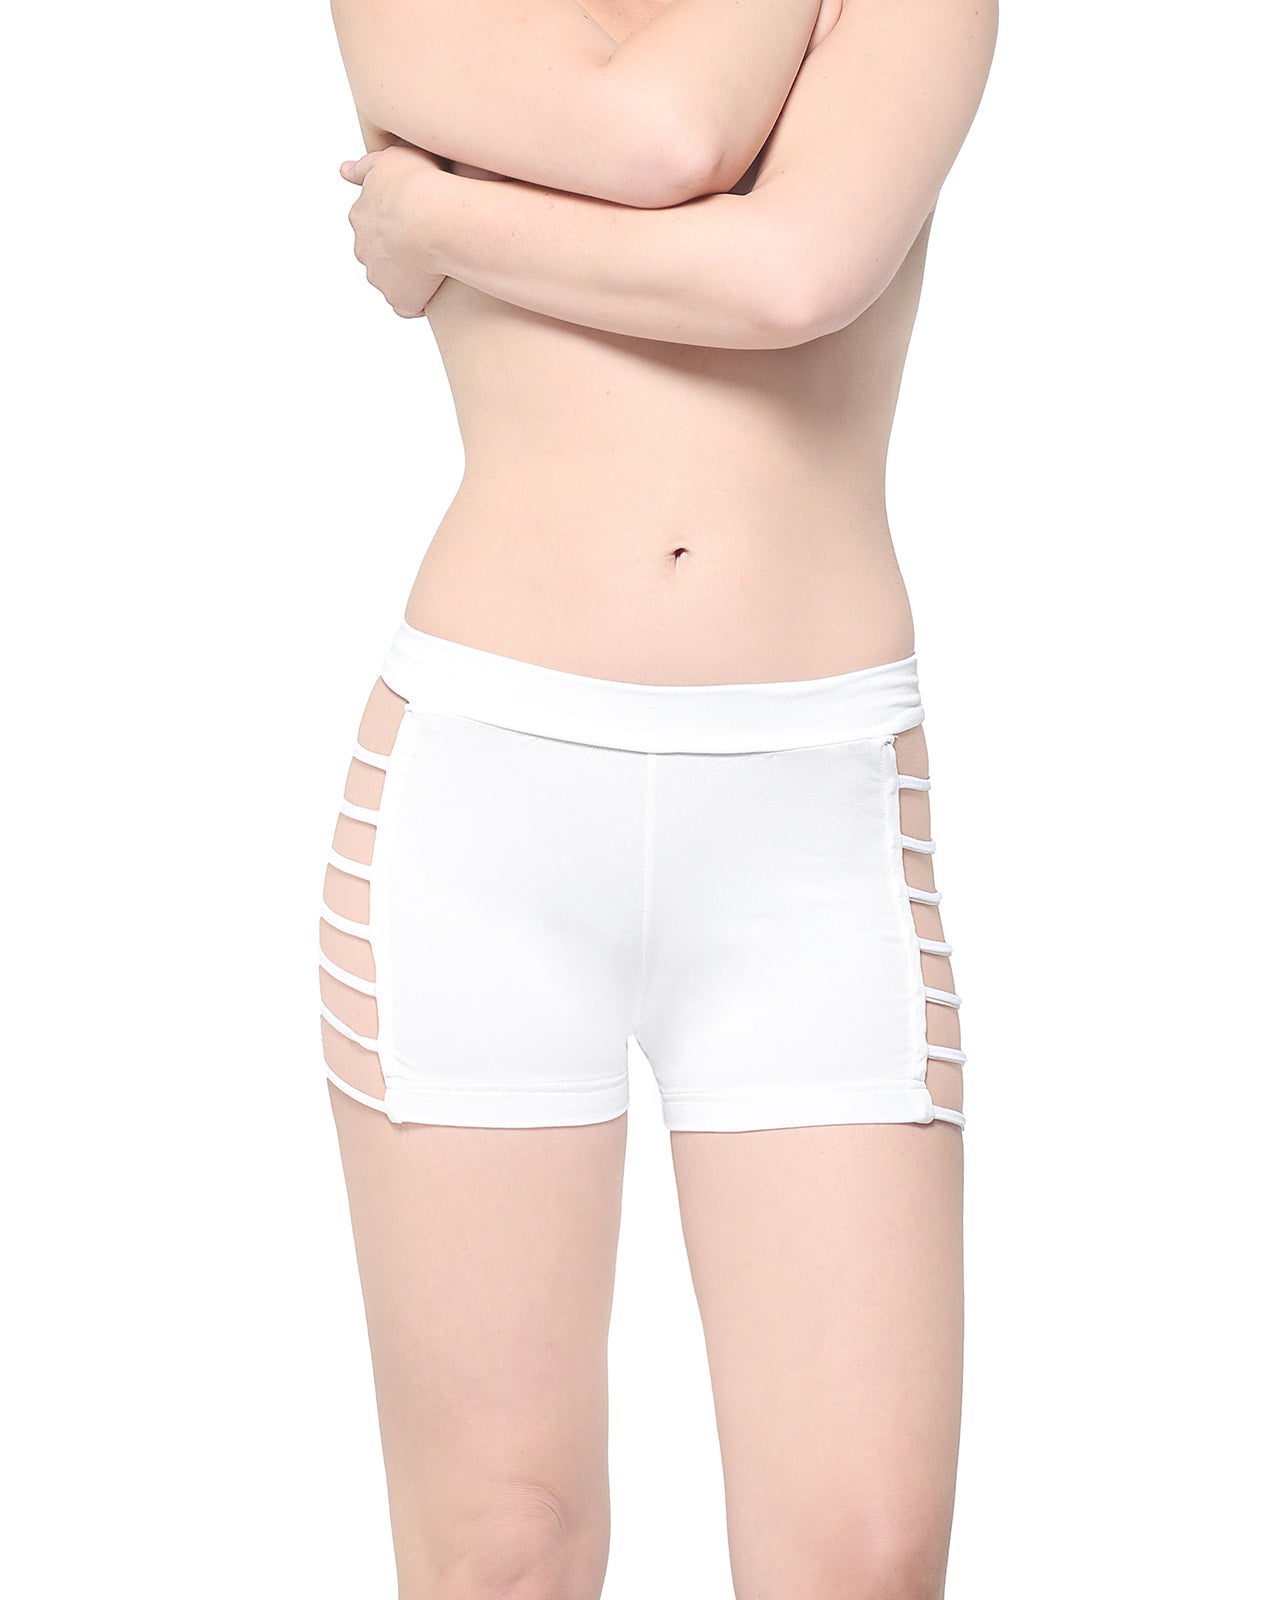 Lynx Shorts - XS in White [SAMPLE SALE]